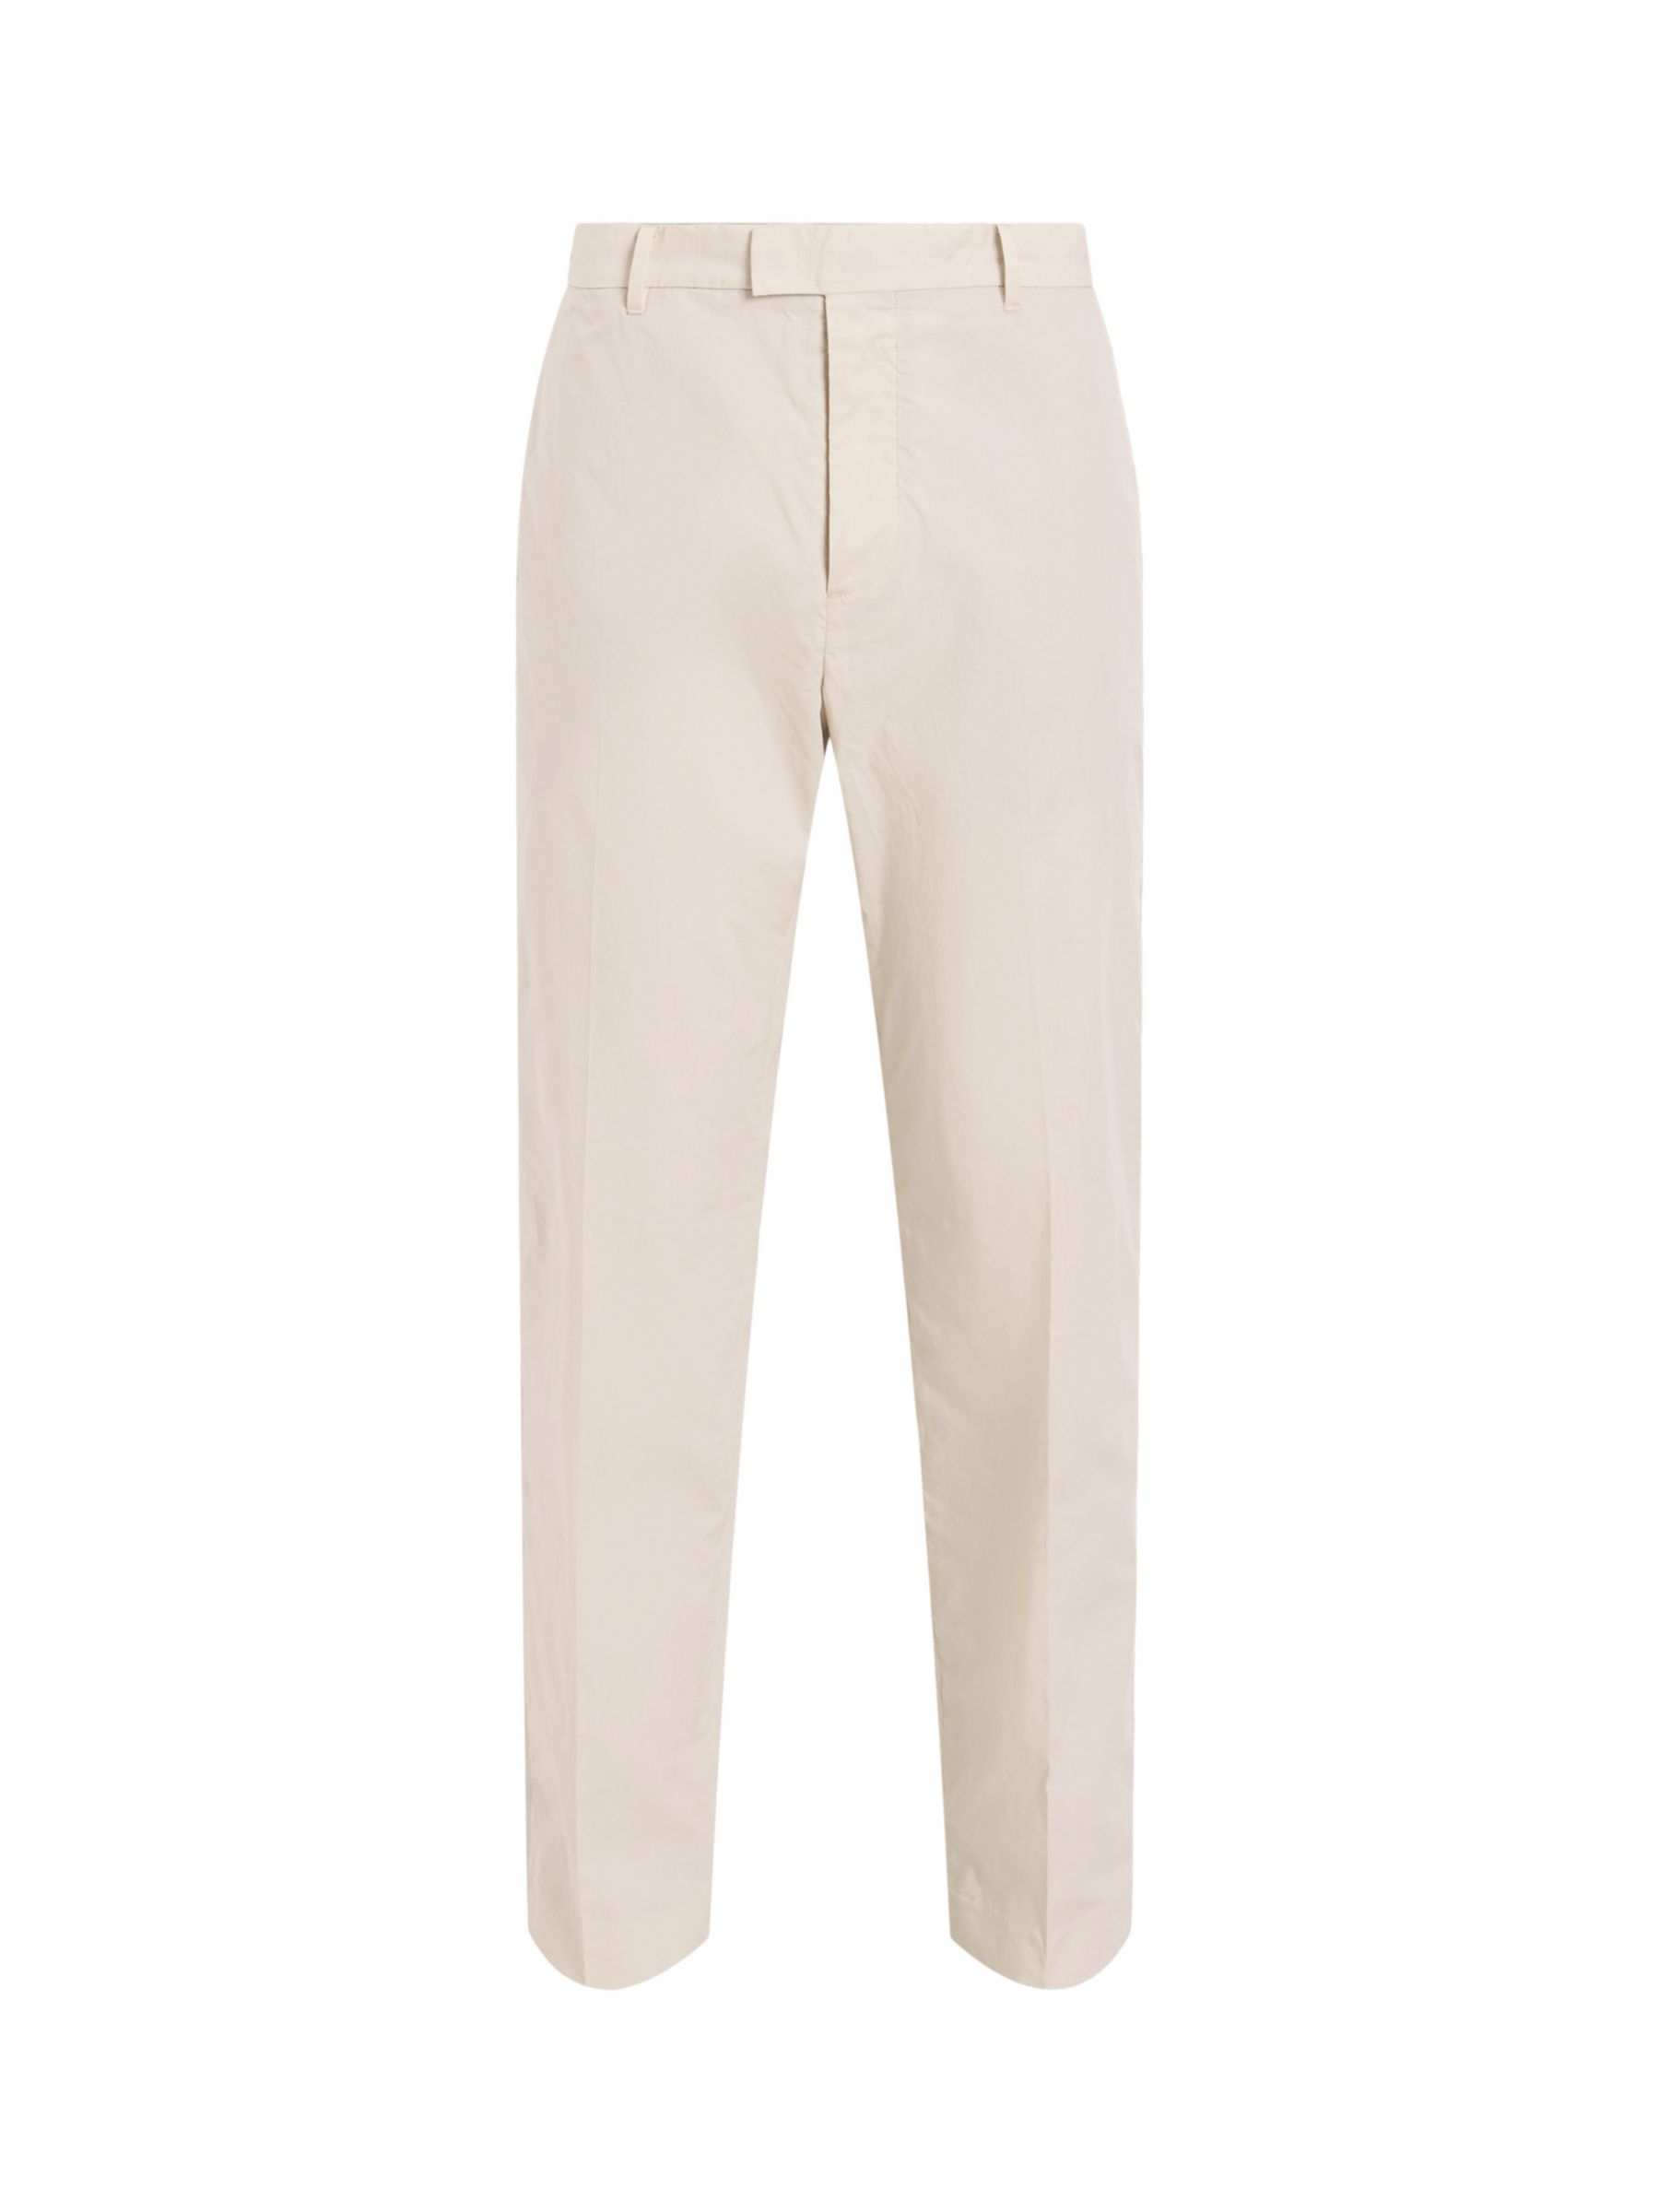 AllSaints Mars Trousers, Bailey Taupe, 28